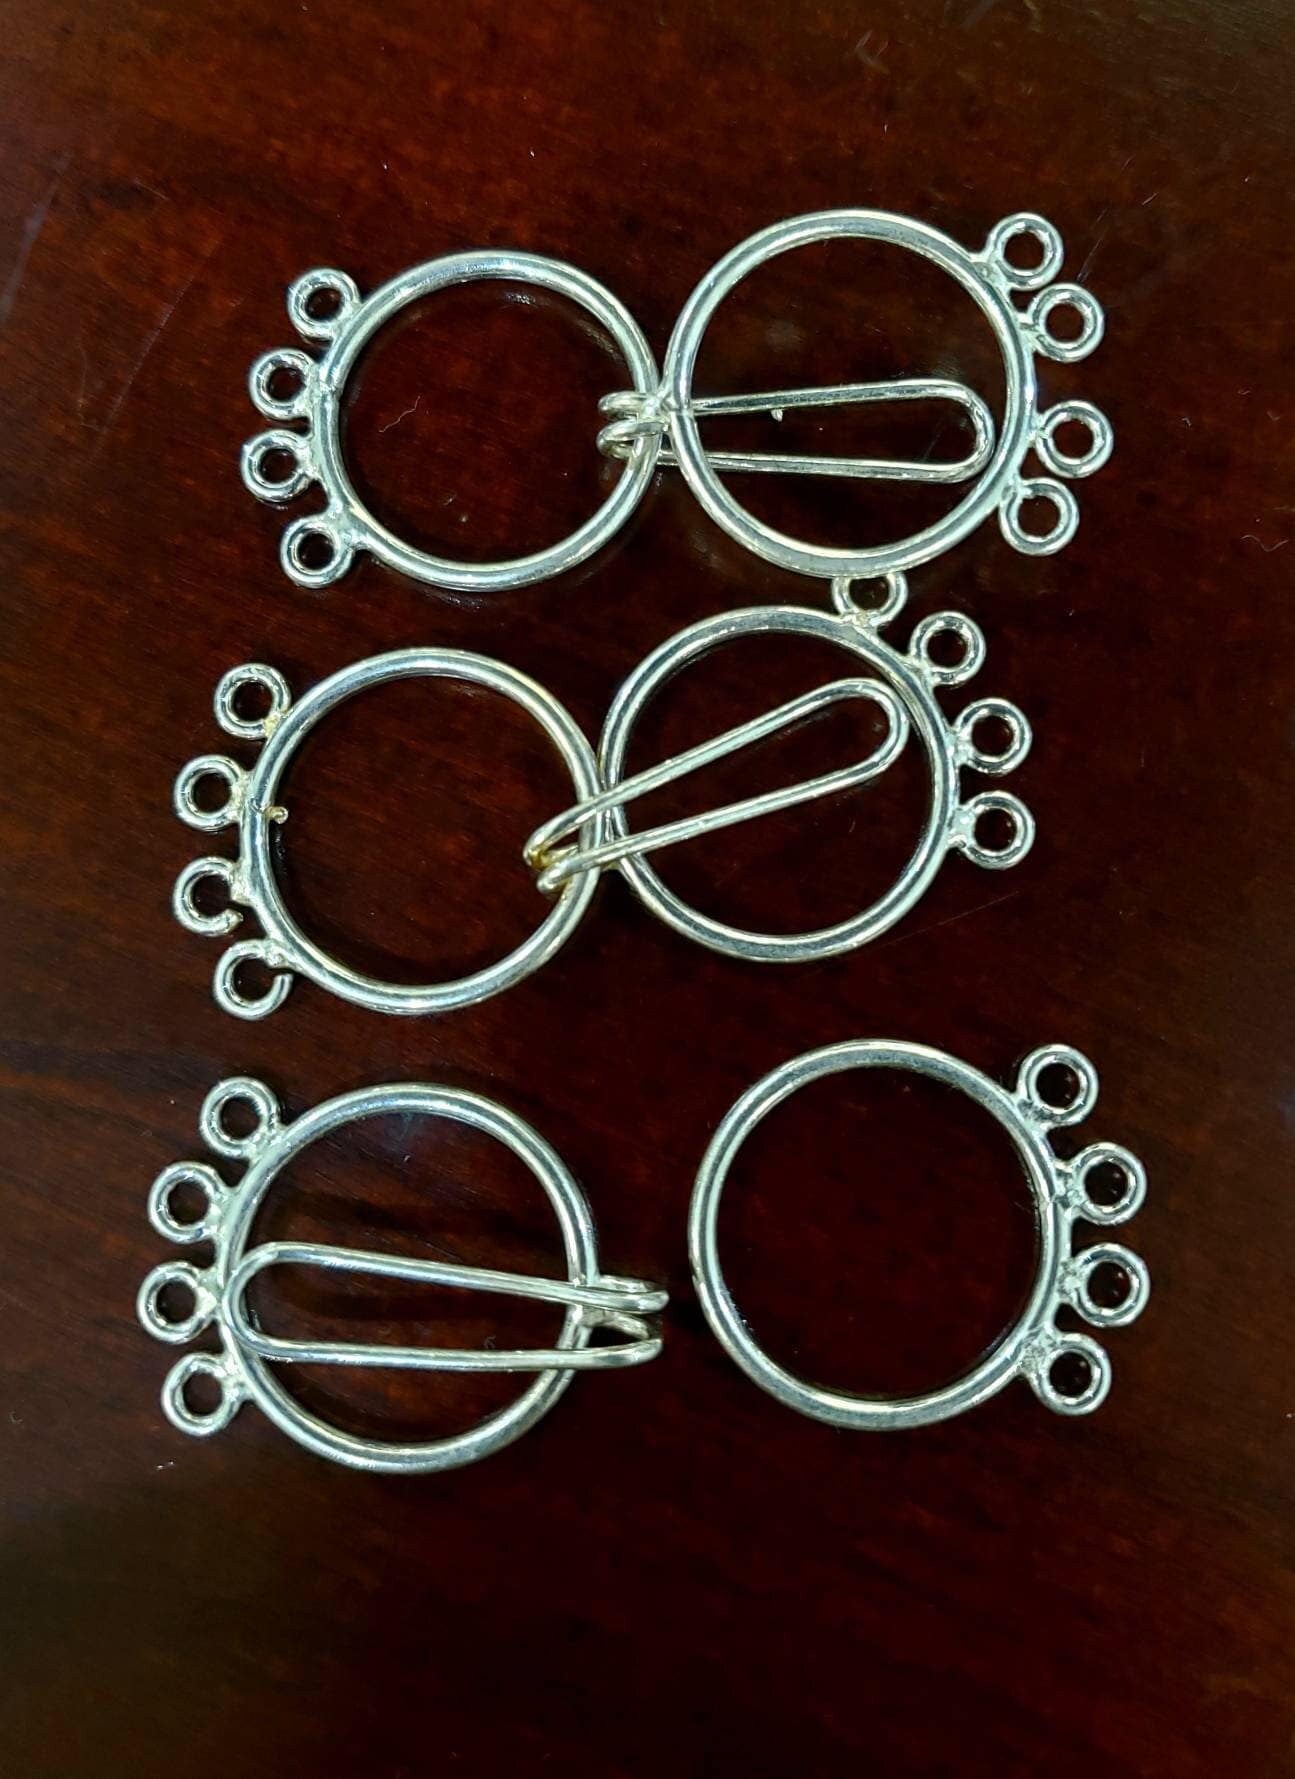 925 sterling silver 4 loop hook and eye circle clasp . 19mm each circle, 38mm long with both circle. Jewelry making multi line clasp . 1 set